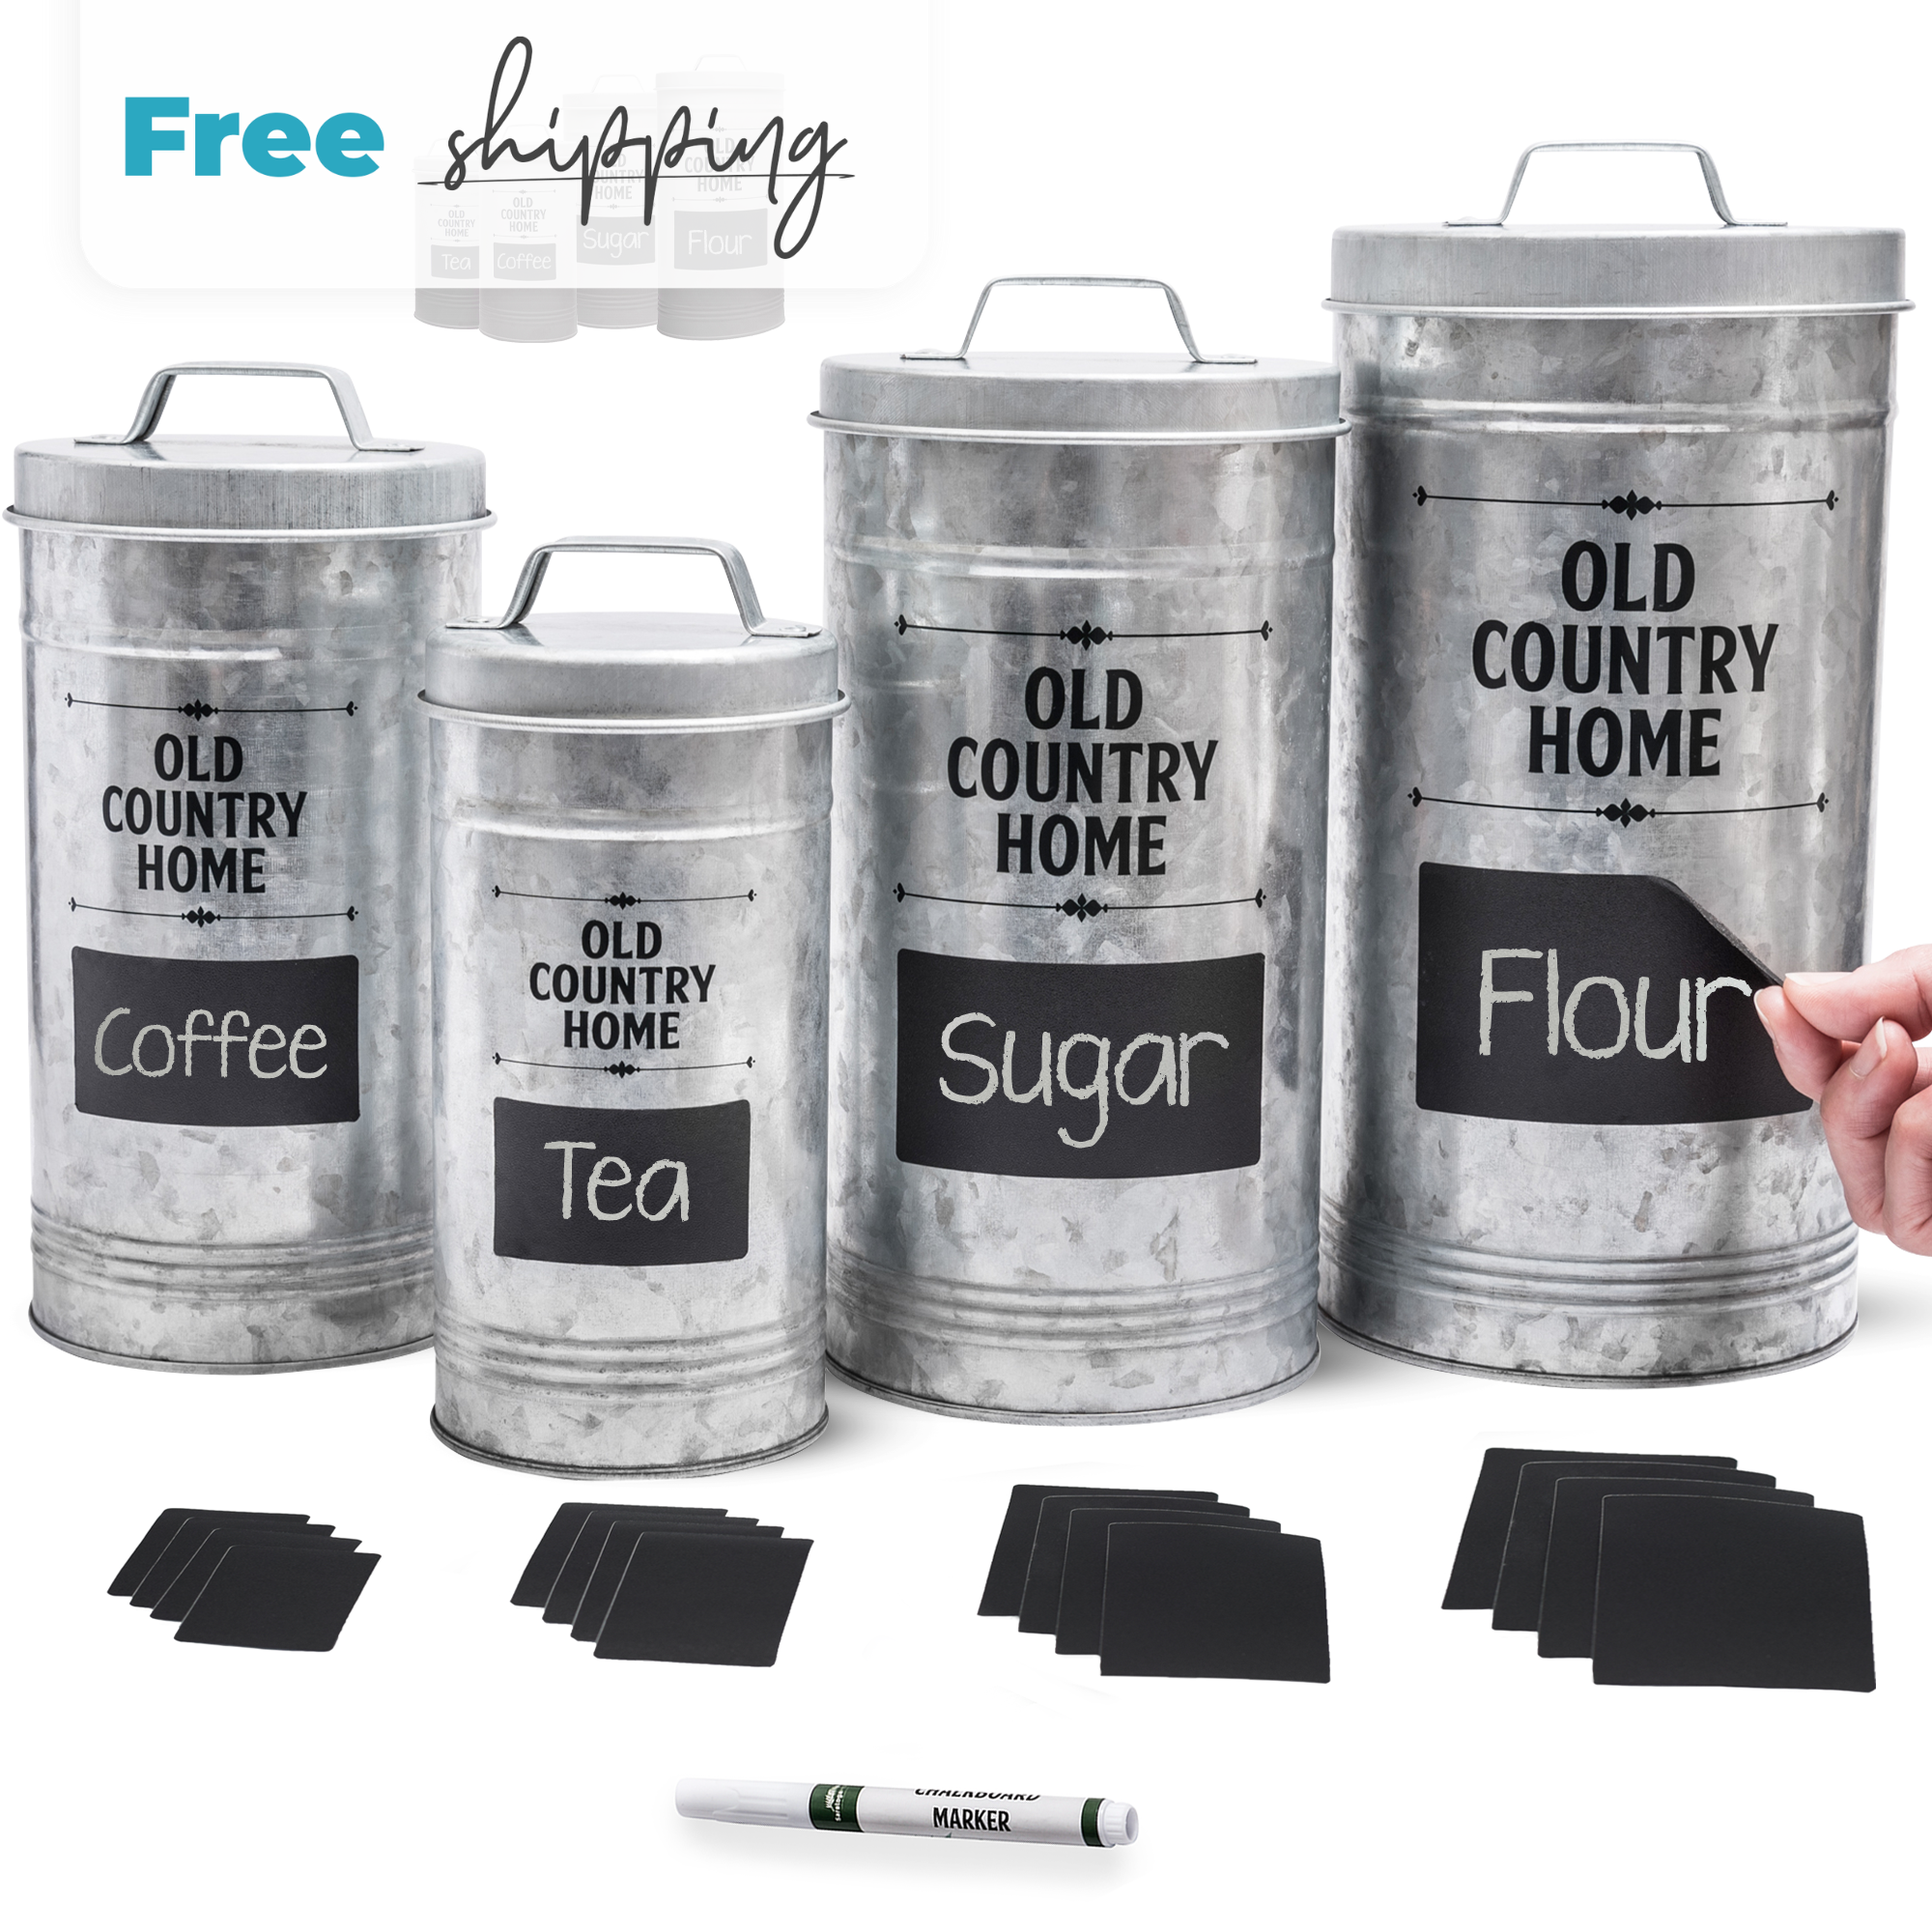  Barnyard Designs Farmhouse Canisters for the Kitchen Counter,  Country Decor - Rustic Flour Sugar Coffee Tea Storage, Set of 4, Largest is  5.5 x 11.25 : Home & Kitchen